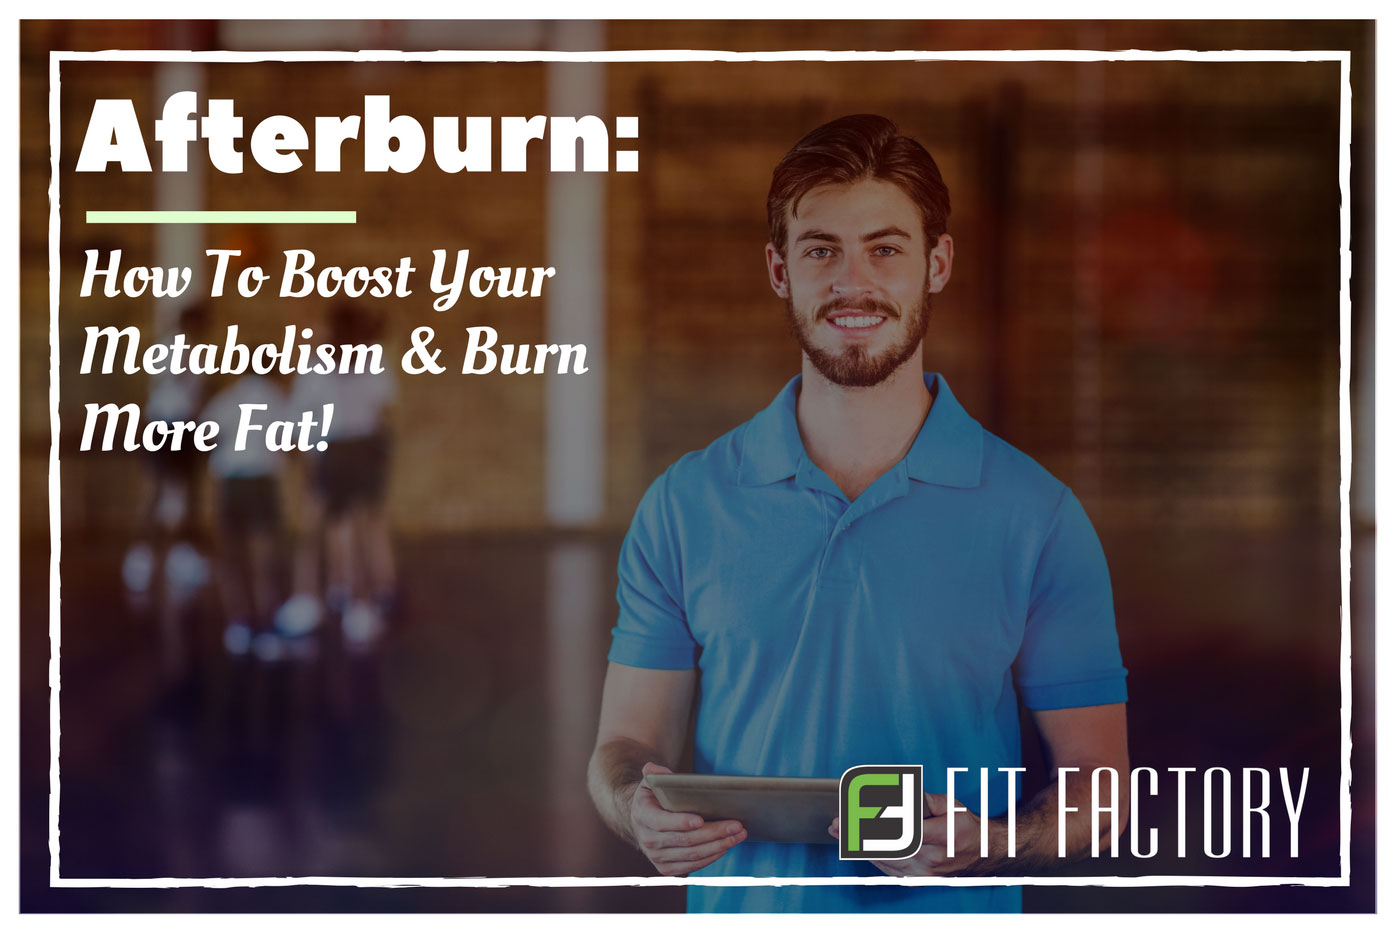 Afterburn: How To Boost Your Metabolism and Burn More Fat